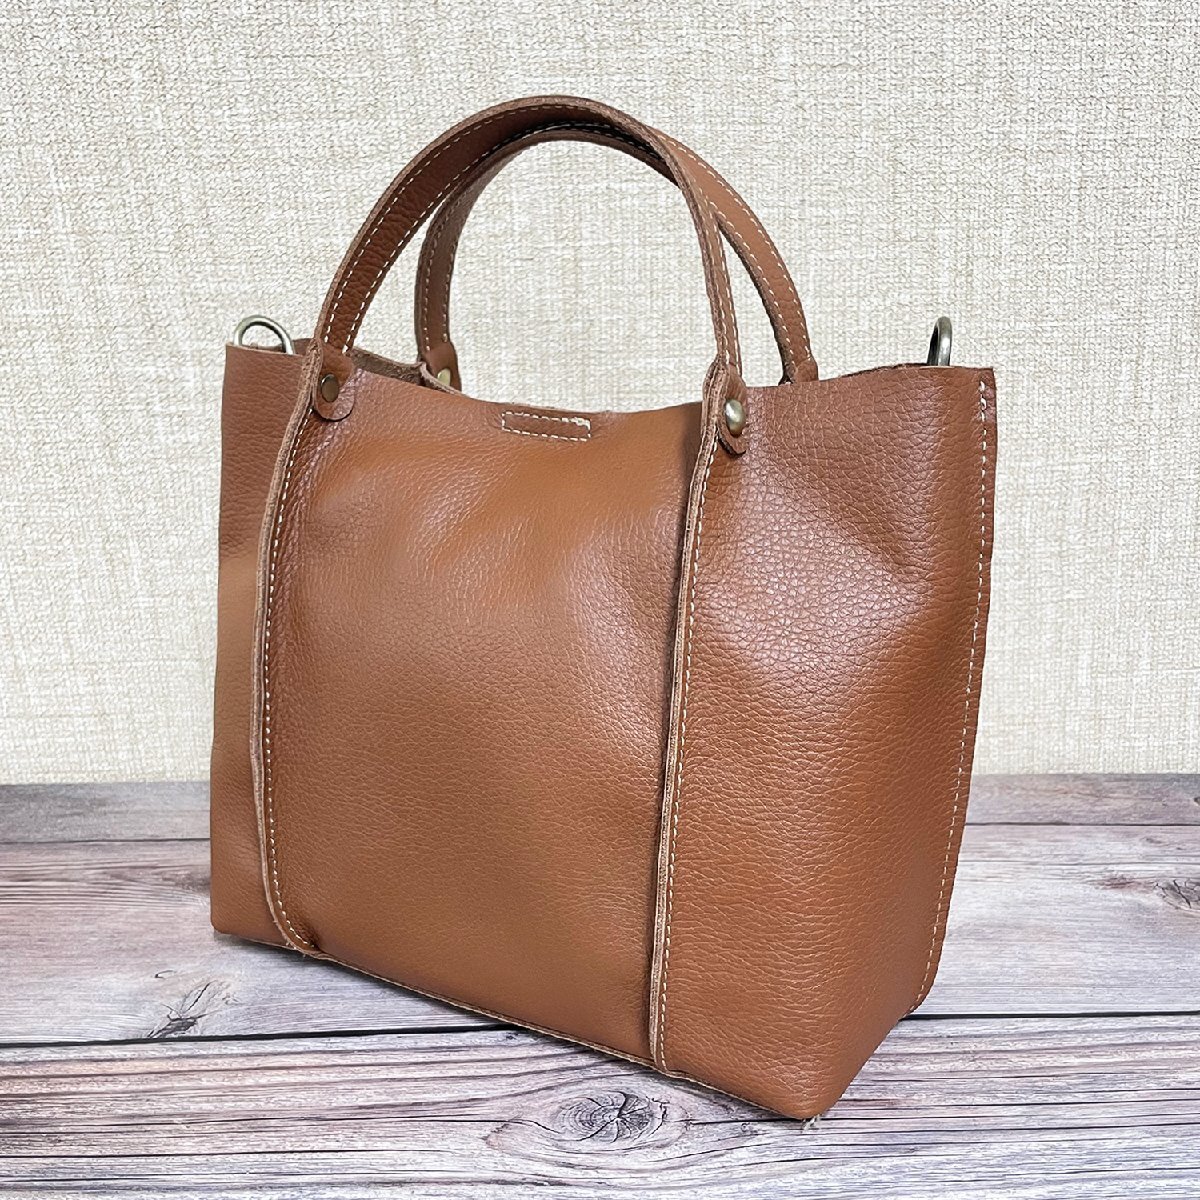  high class handbag regular price 12 ten thousand FRANKLIN MUSK* America * New York departure fine quality cow leather leather original leather diagonal .. shoulder bag pouch attaching everyday 